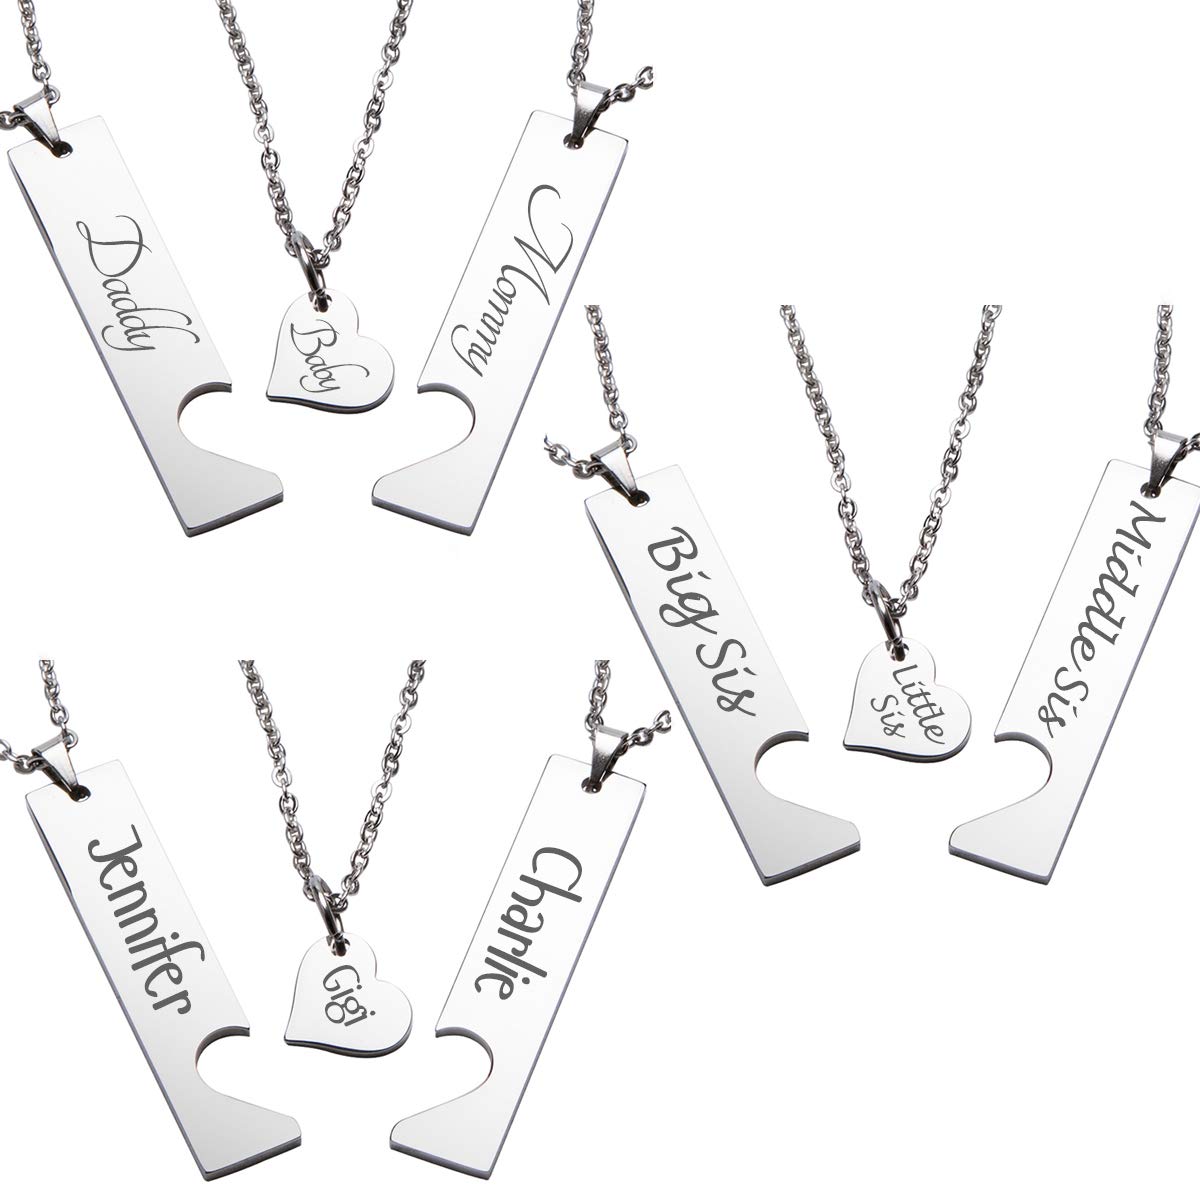 Fanery sue Personalized Custom Engraved Name Vertical Bar Matching Heart Necklaces for Family of 3 Love Friendship Jewelry